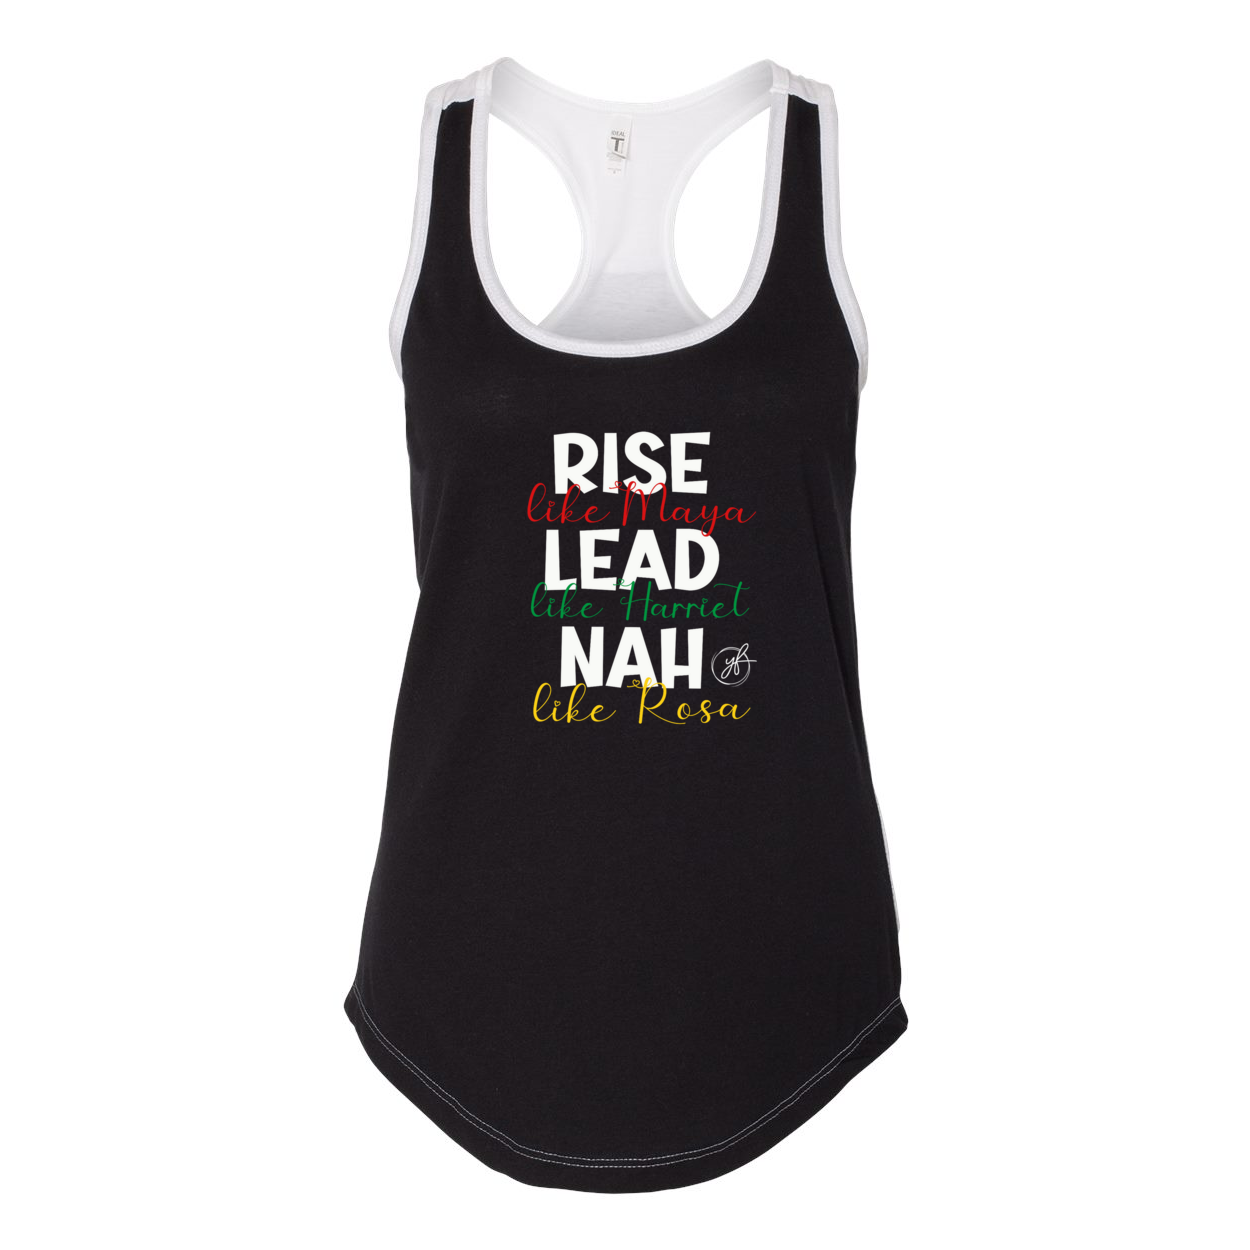 YOLO FITTED'S WOMEN LEADER HOMAGE COLOR BLOCK RACER BACK TANK